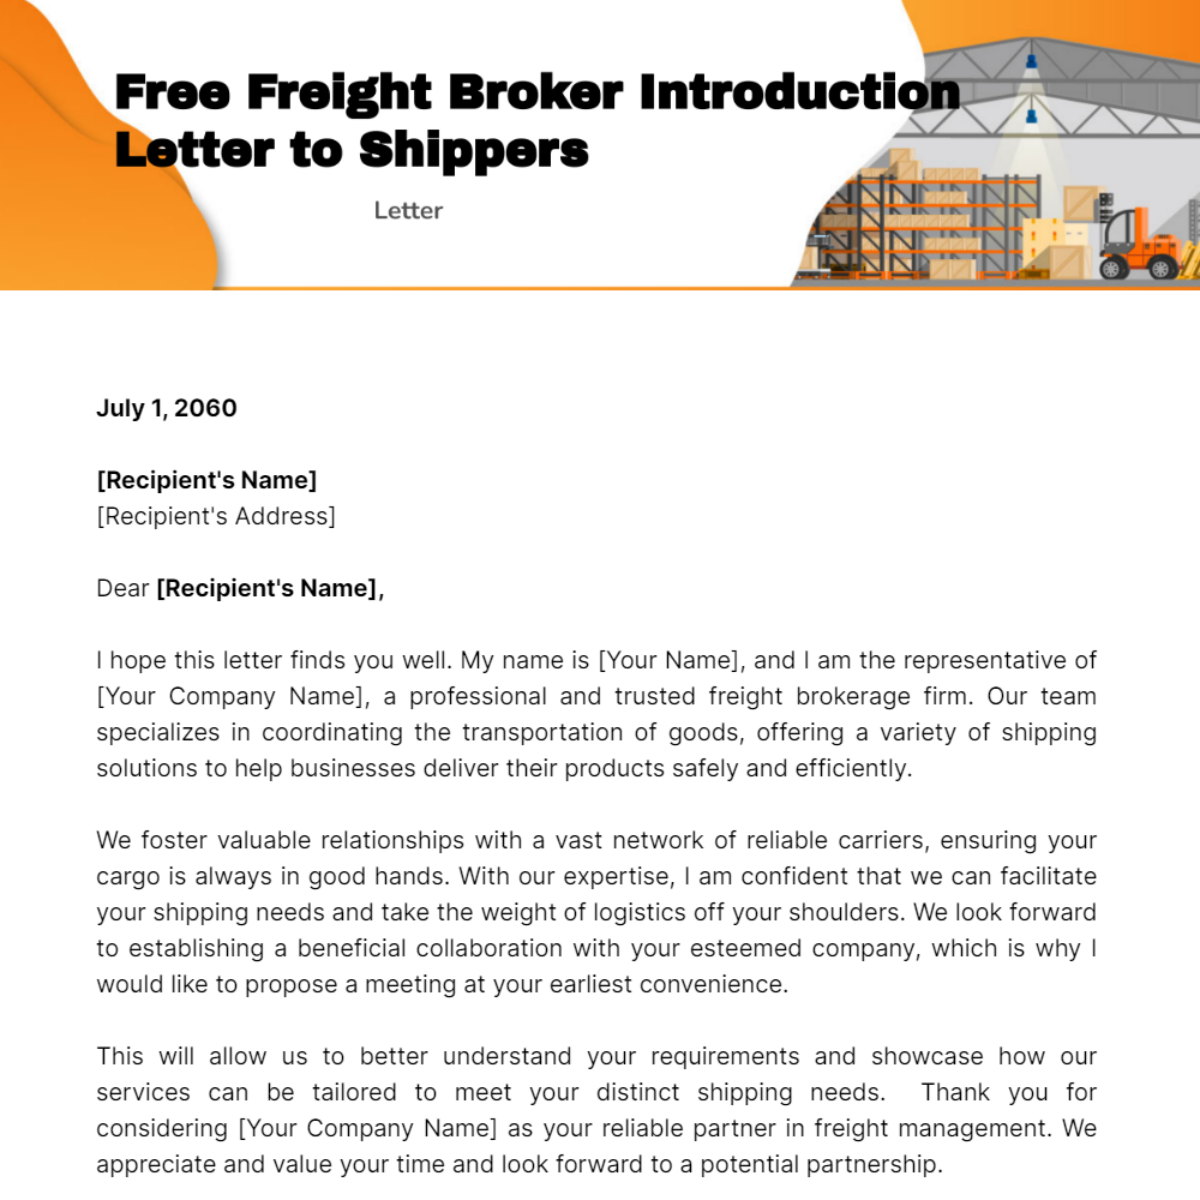 Freight Broker Introduction Letter to Shippers Template